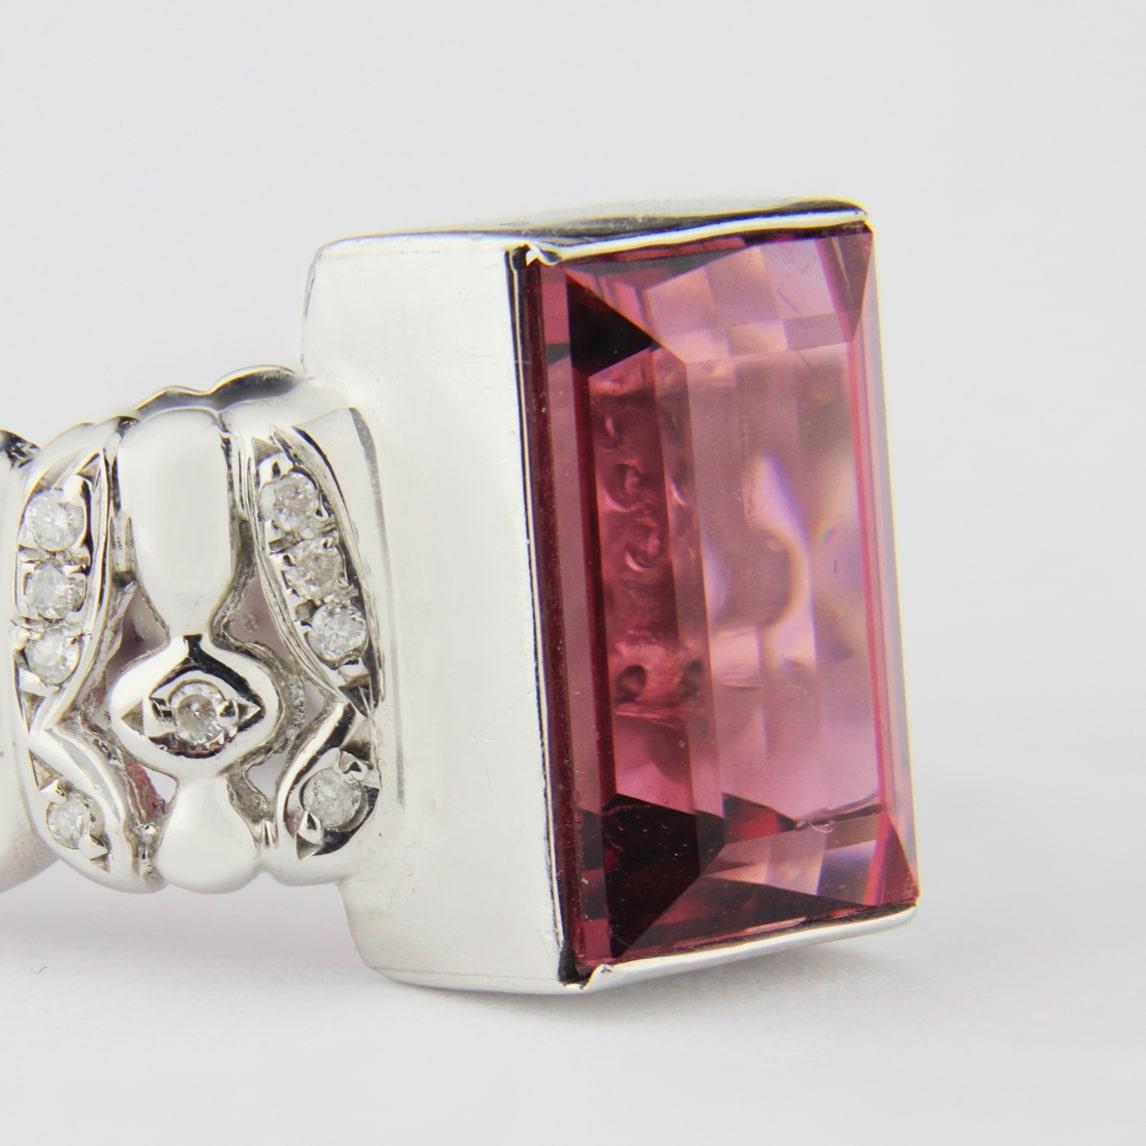 A chic platinum ring with a central pink tourmaline that has shoulders set with diamonds. The central pink tourmaline is 6.95 carat 'bright mid pink eye clean' which has been end cap set. The shoulders of the piece are patterned and set with 28